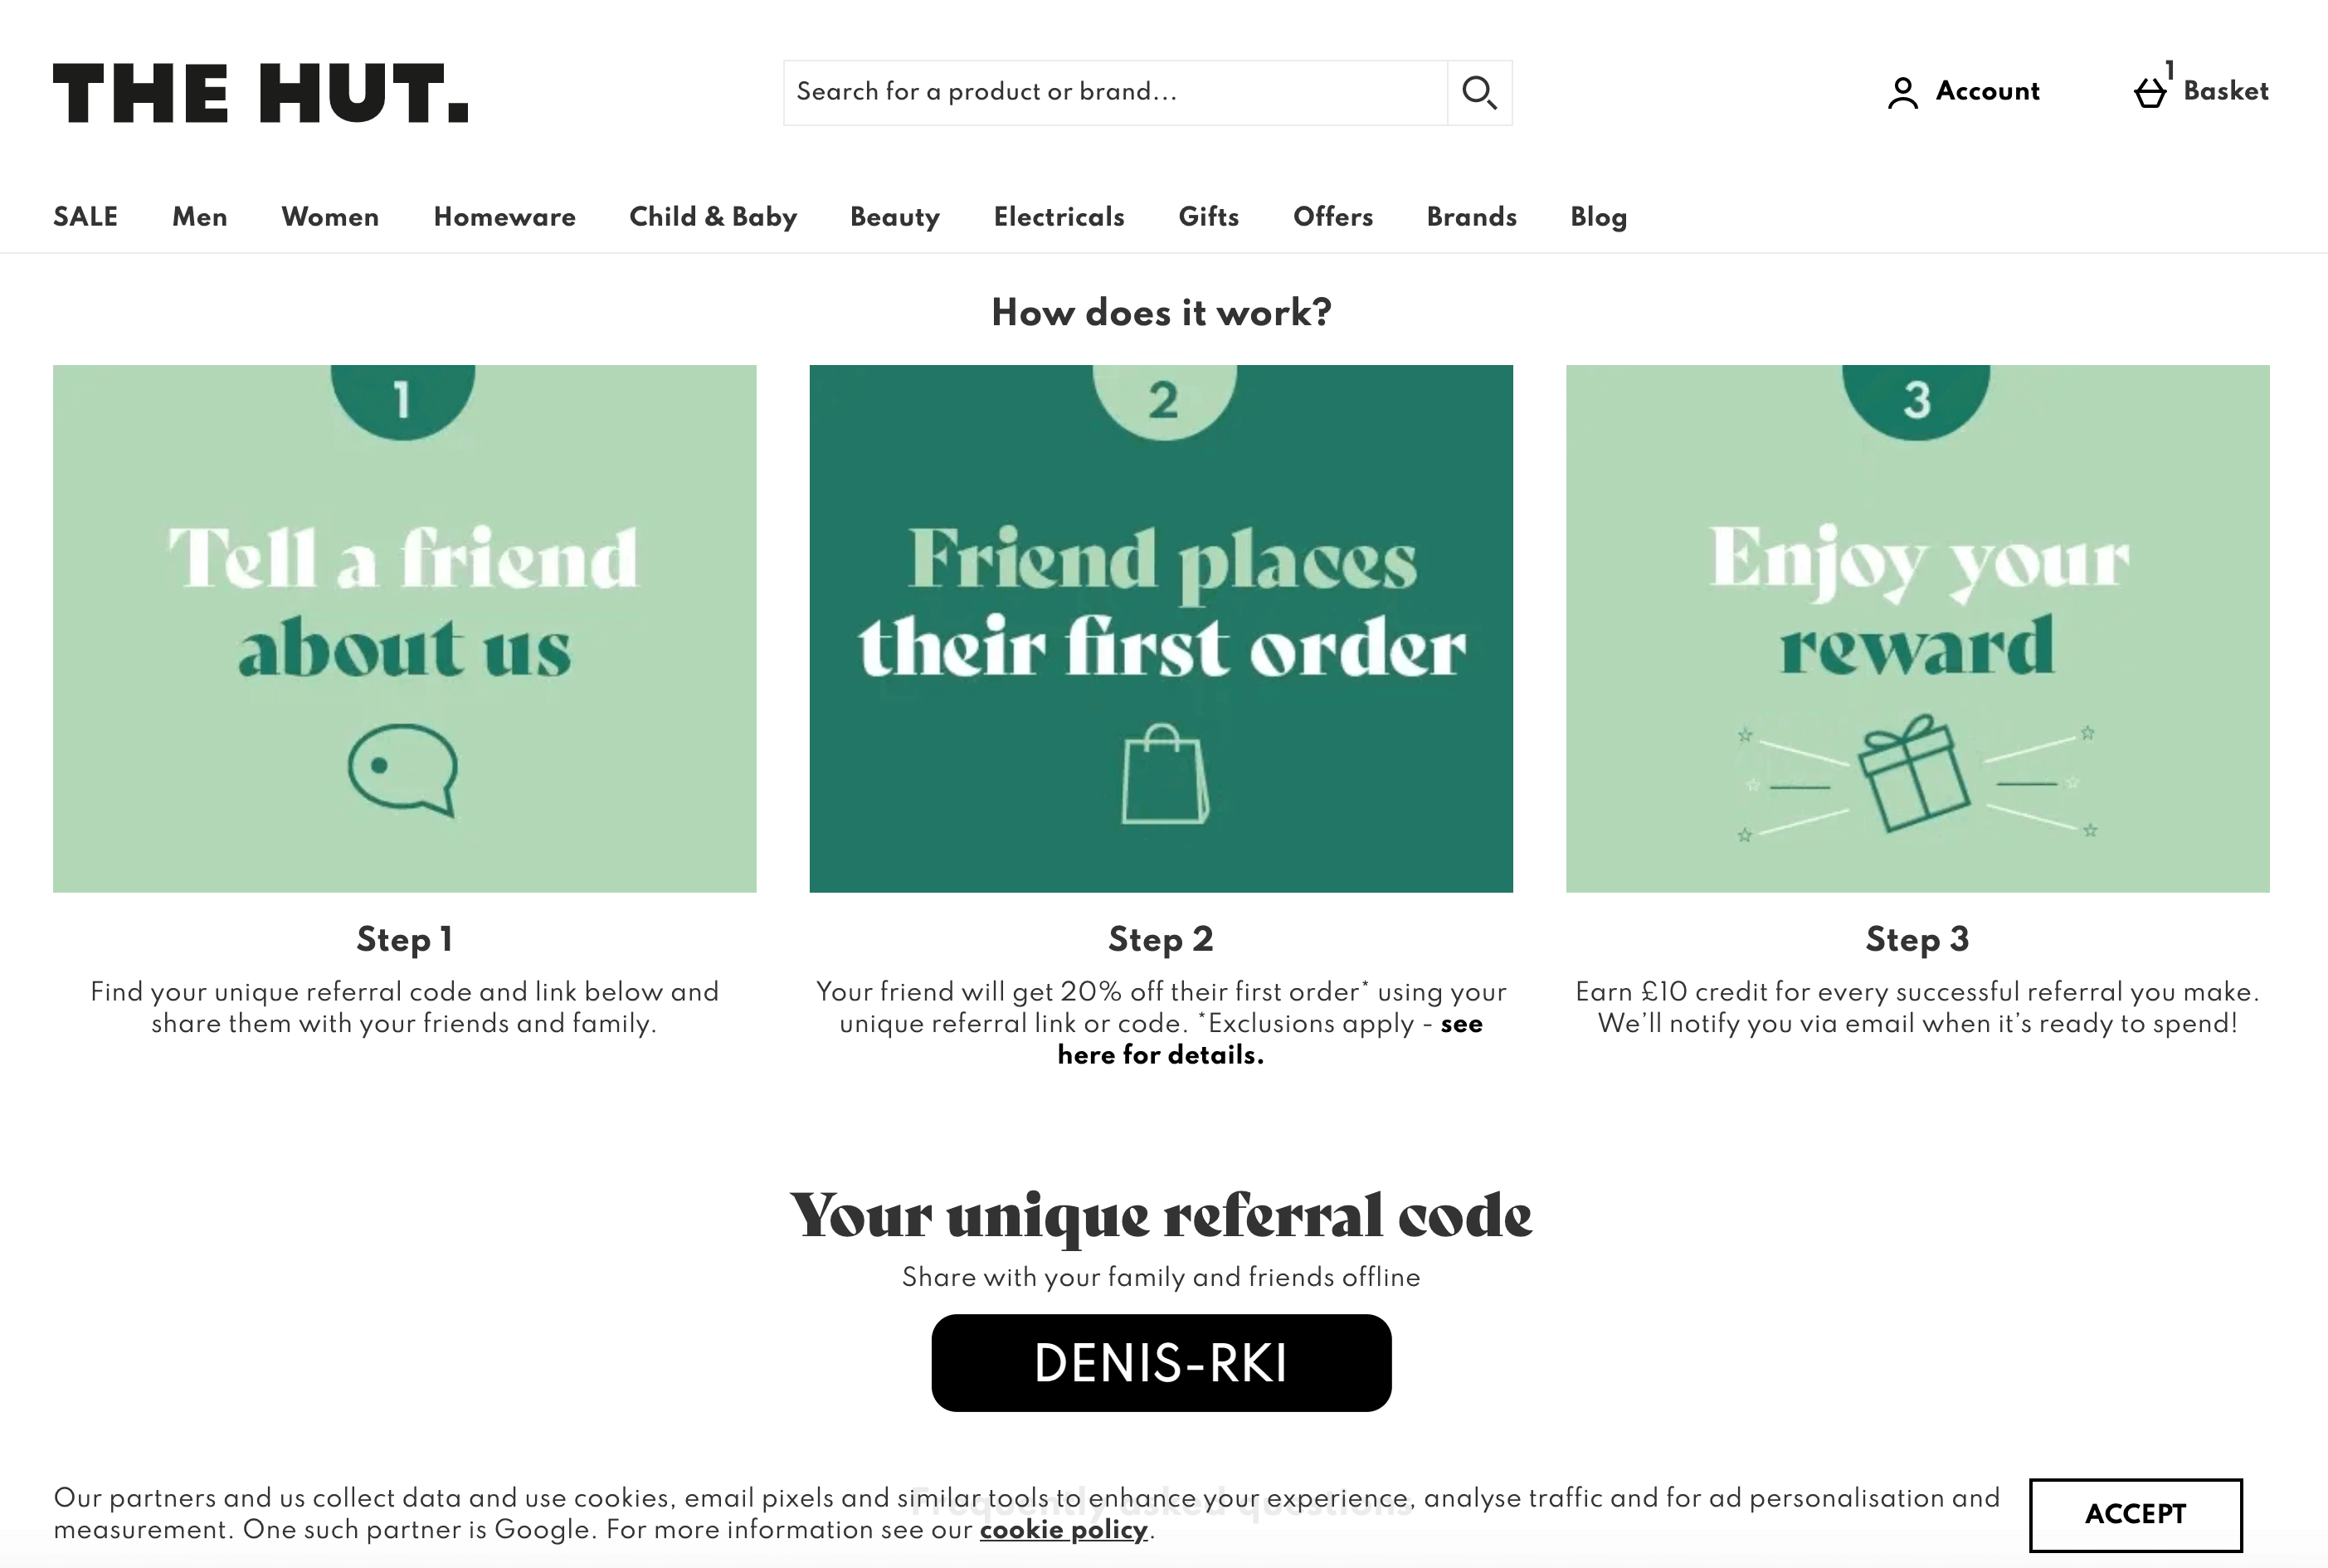 The Hut referral code discount 20% off discount for new customers